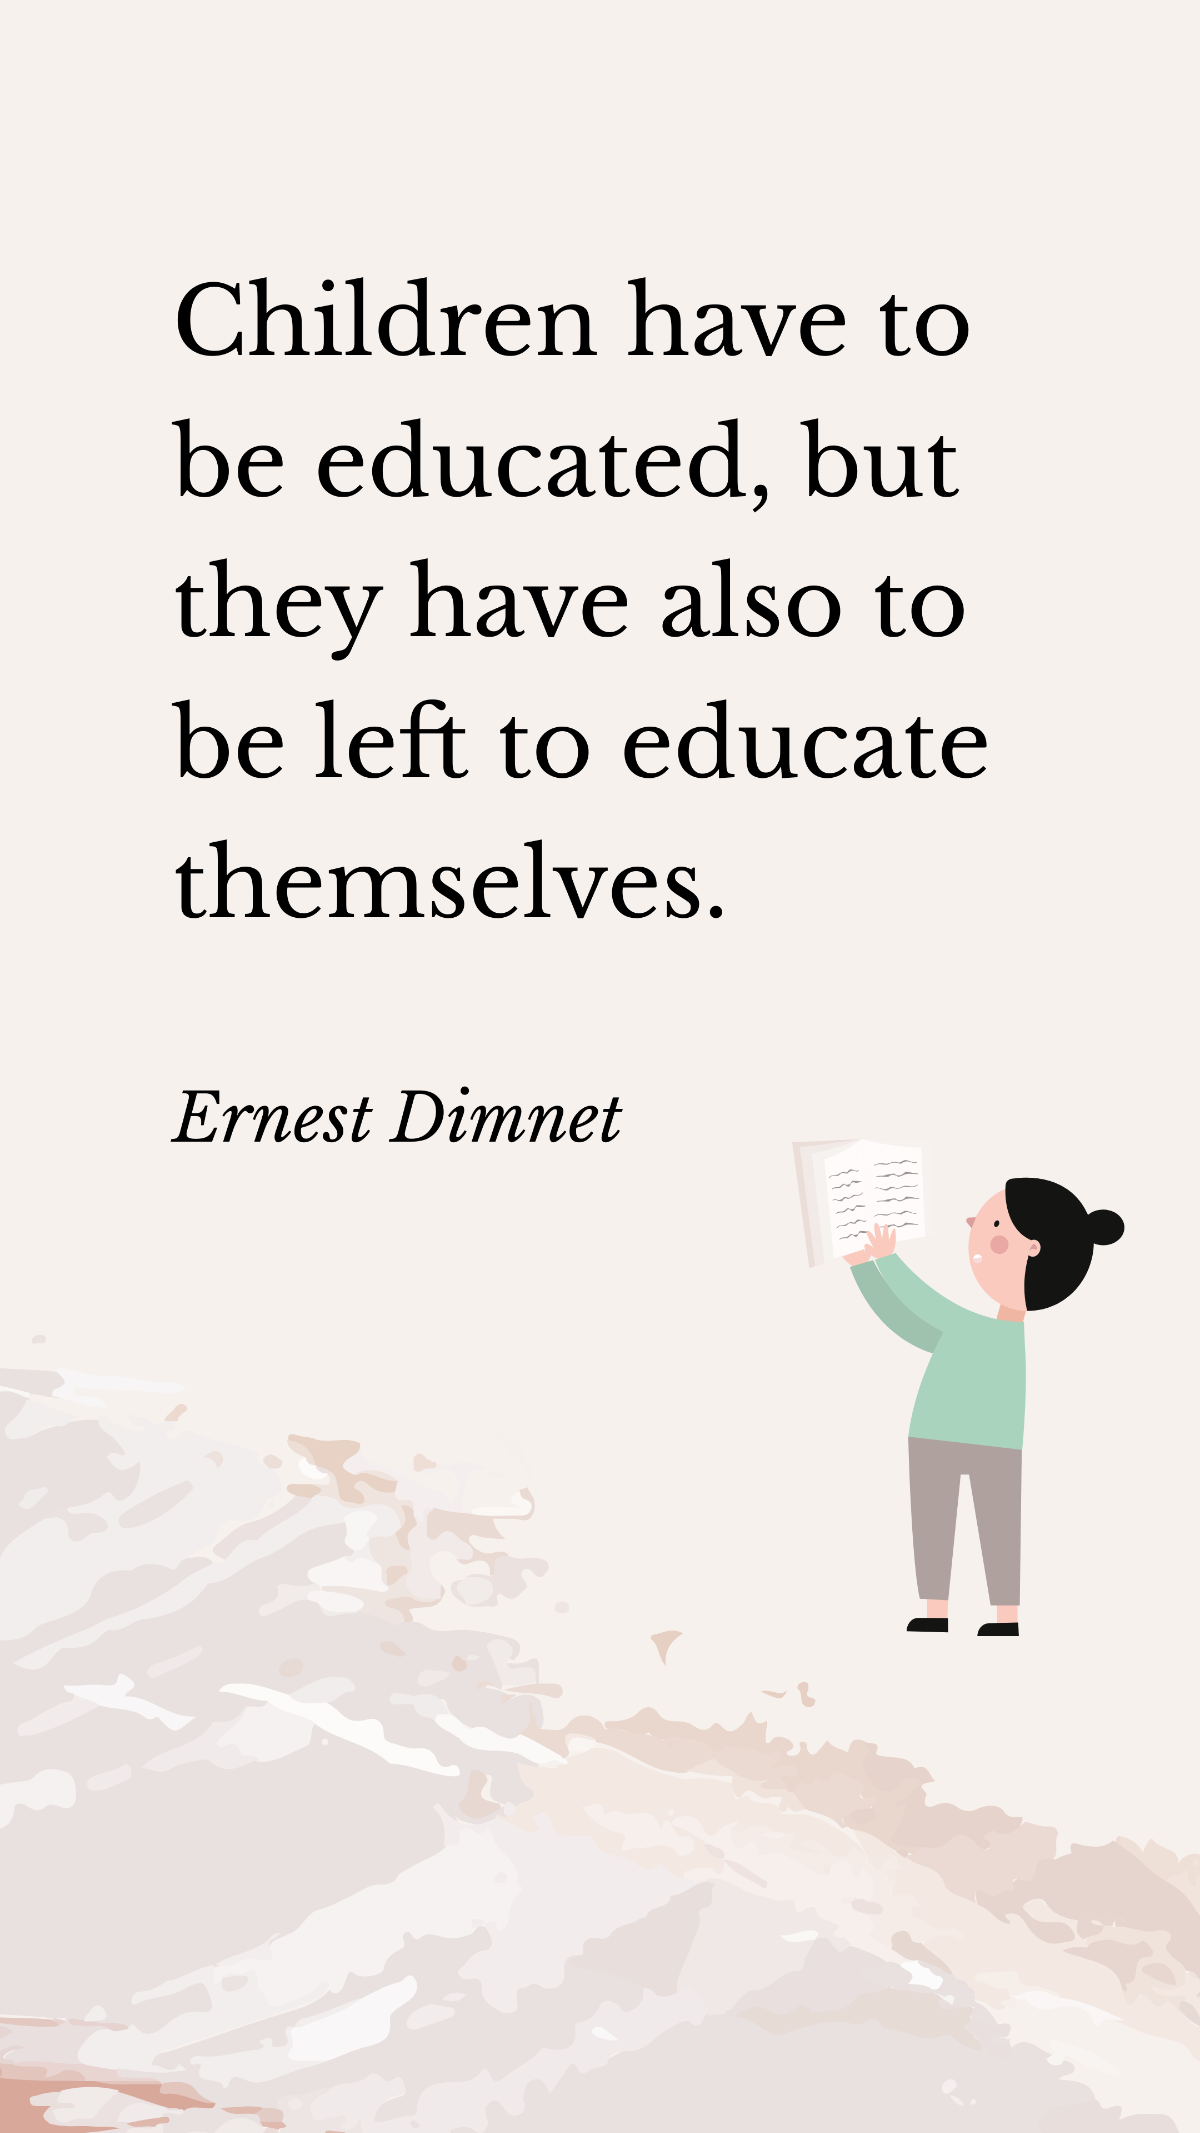 Ernest Dimnet - Children have to be educated, but they have also to be left to educate themselves. Template